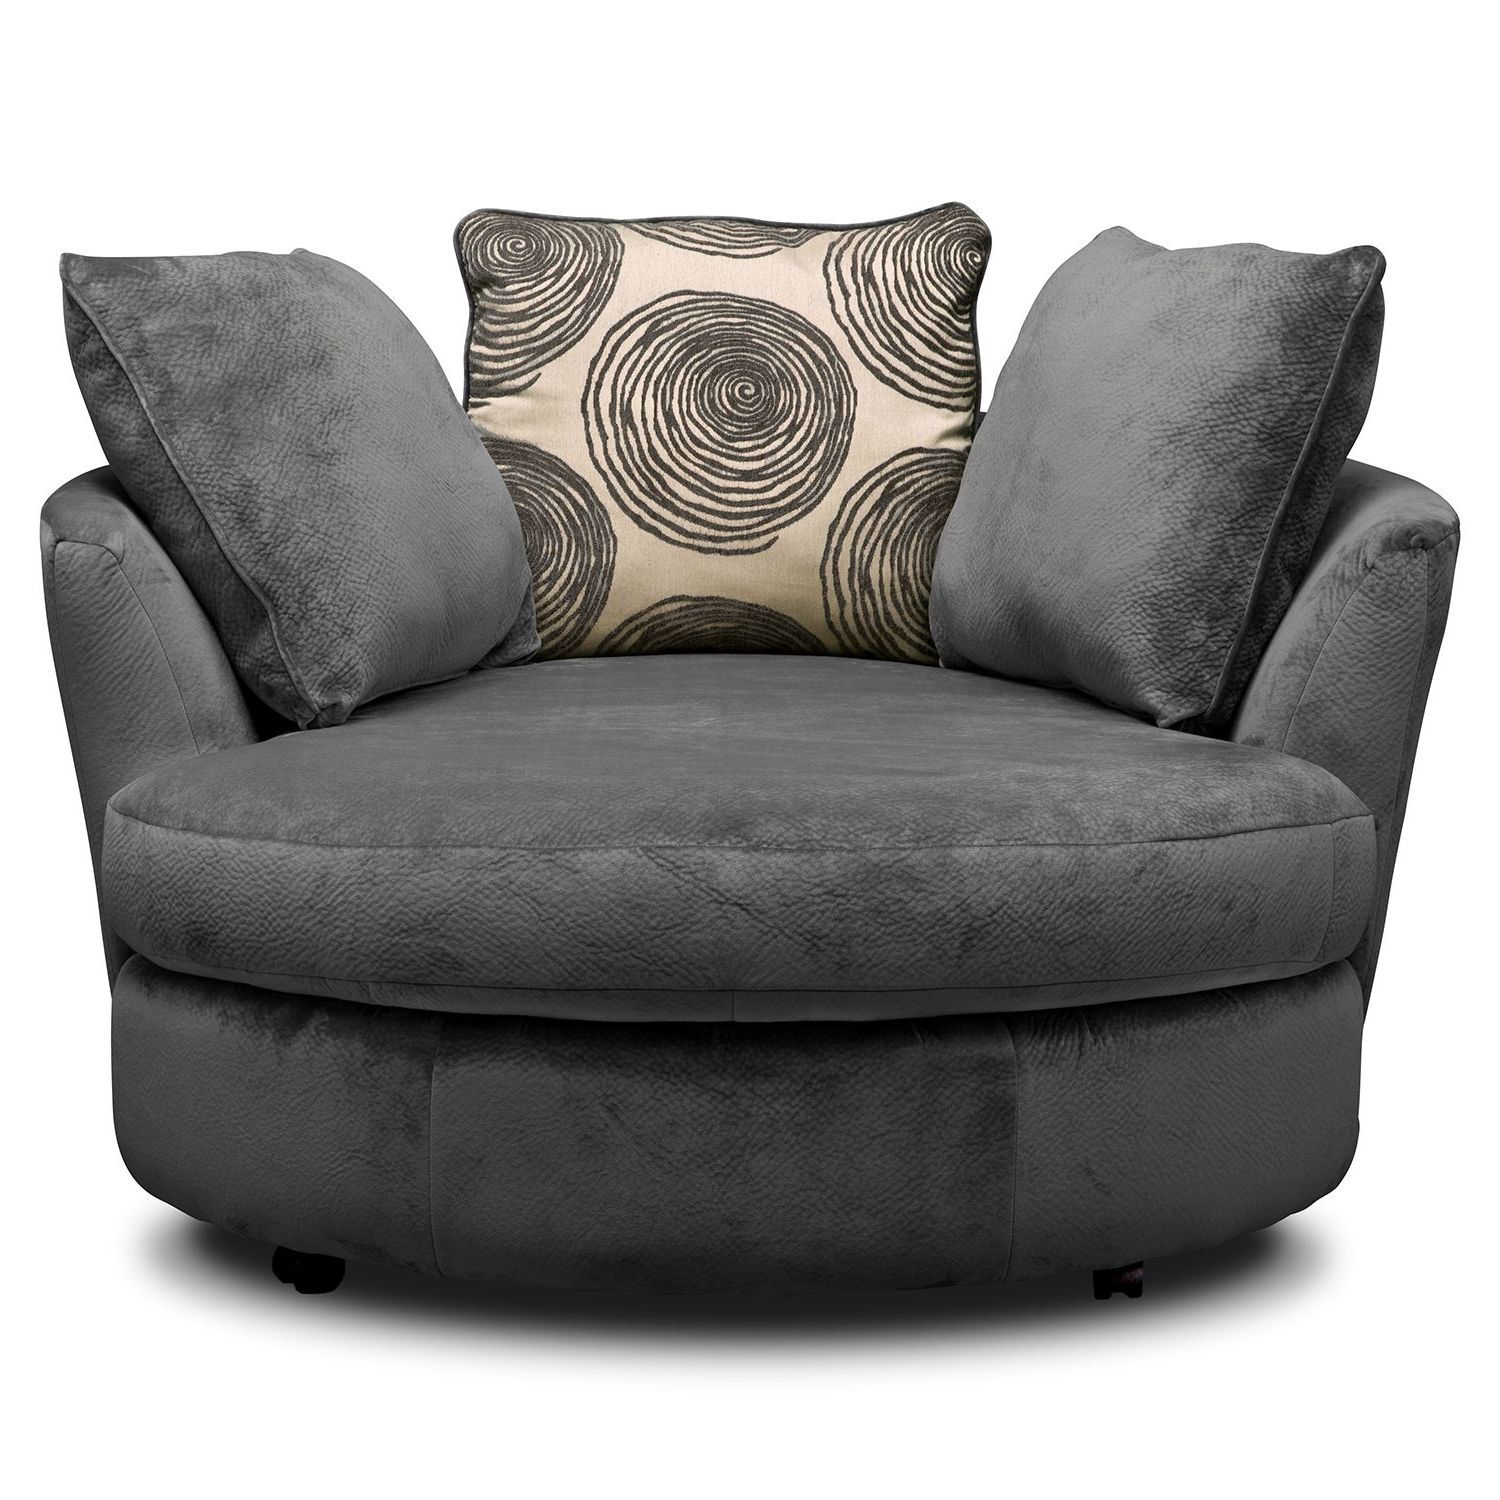 Most Recent Furniture Home: 1 Piece Curved Sofa Amazon Furniture Chair For Circular Sofa Chairs (View 1 of 15)